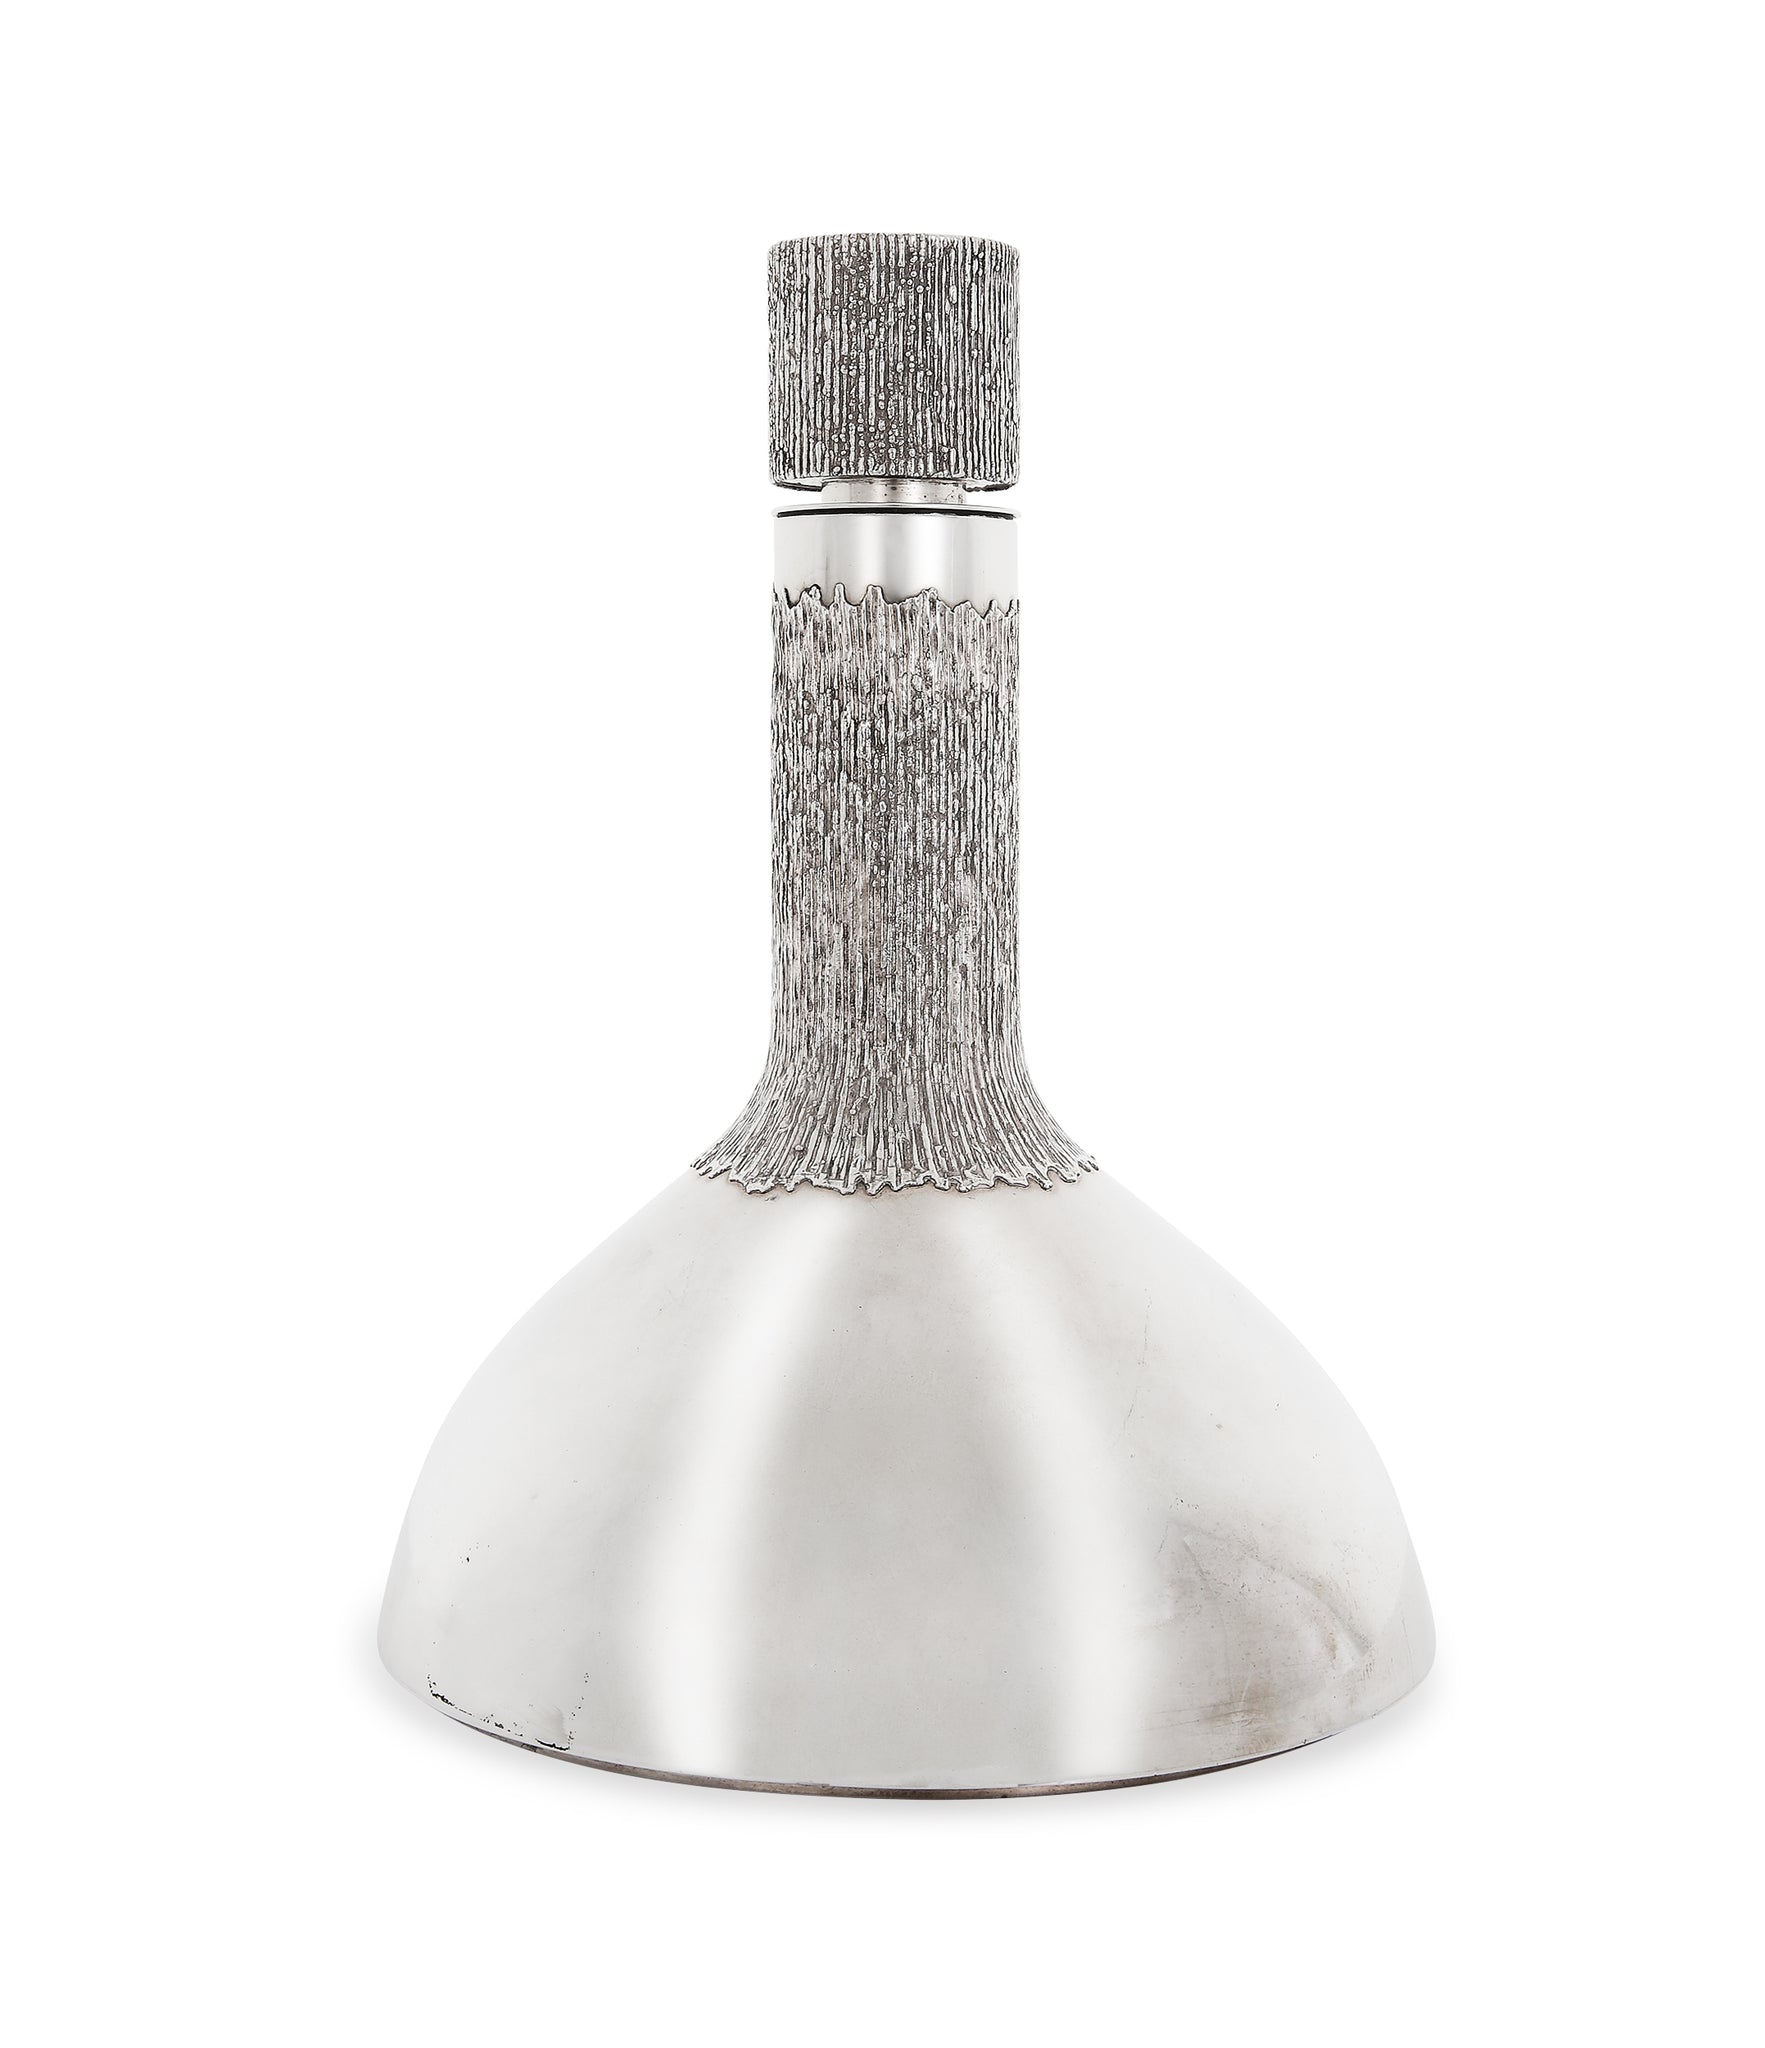 biophilic George Grant MacDonald silver decanter with organic texture at A Collected Man London home of rare objects